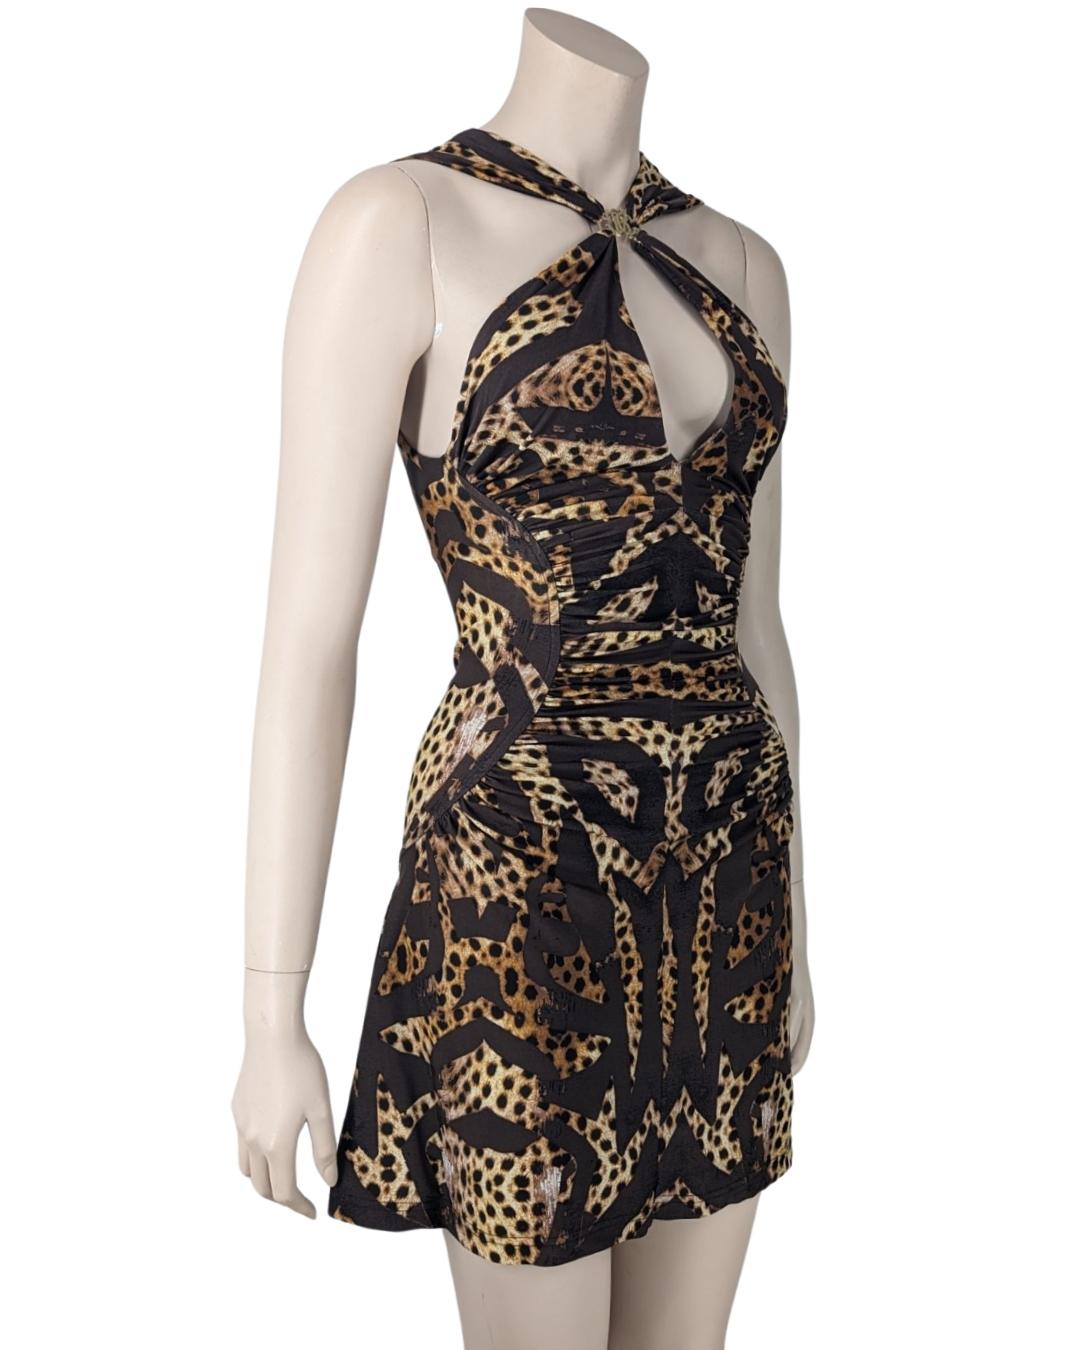 Roberto Cavalli Floral Graphic and Animal Halter Mini Dress. Circa 2000s

. Criss-Cross straps with Gold Logo attach on the front
. Halter top with deep V neckline
. Mini dress

Size fits XS / S

Flat measurements

Breast : 37 cm
Waist : 35 cm
Hips